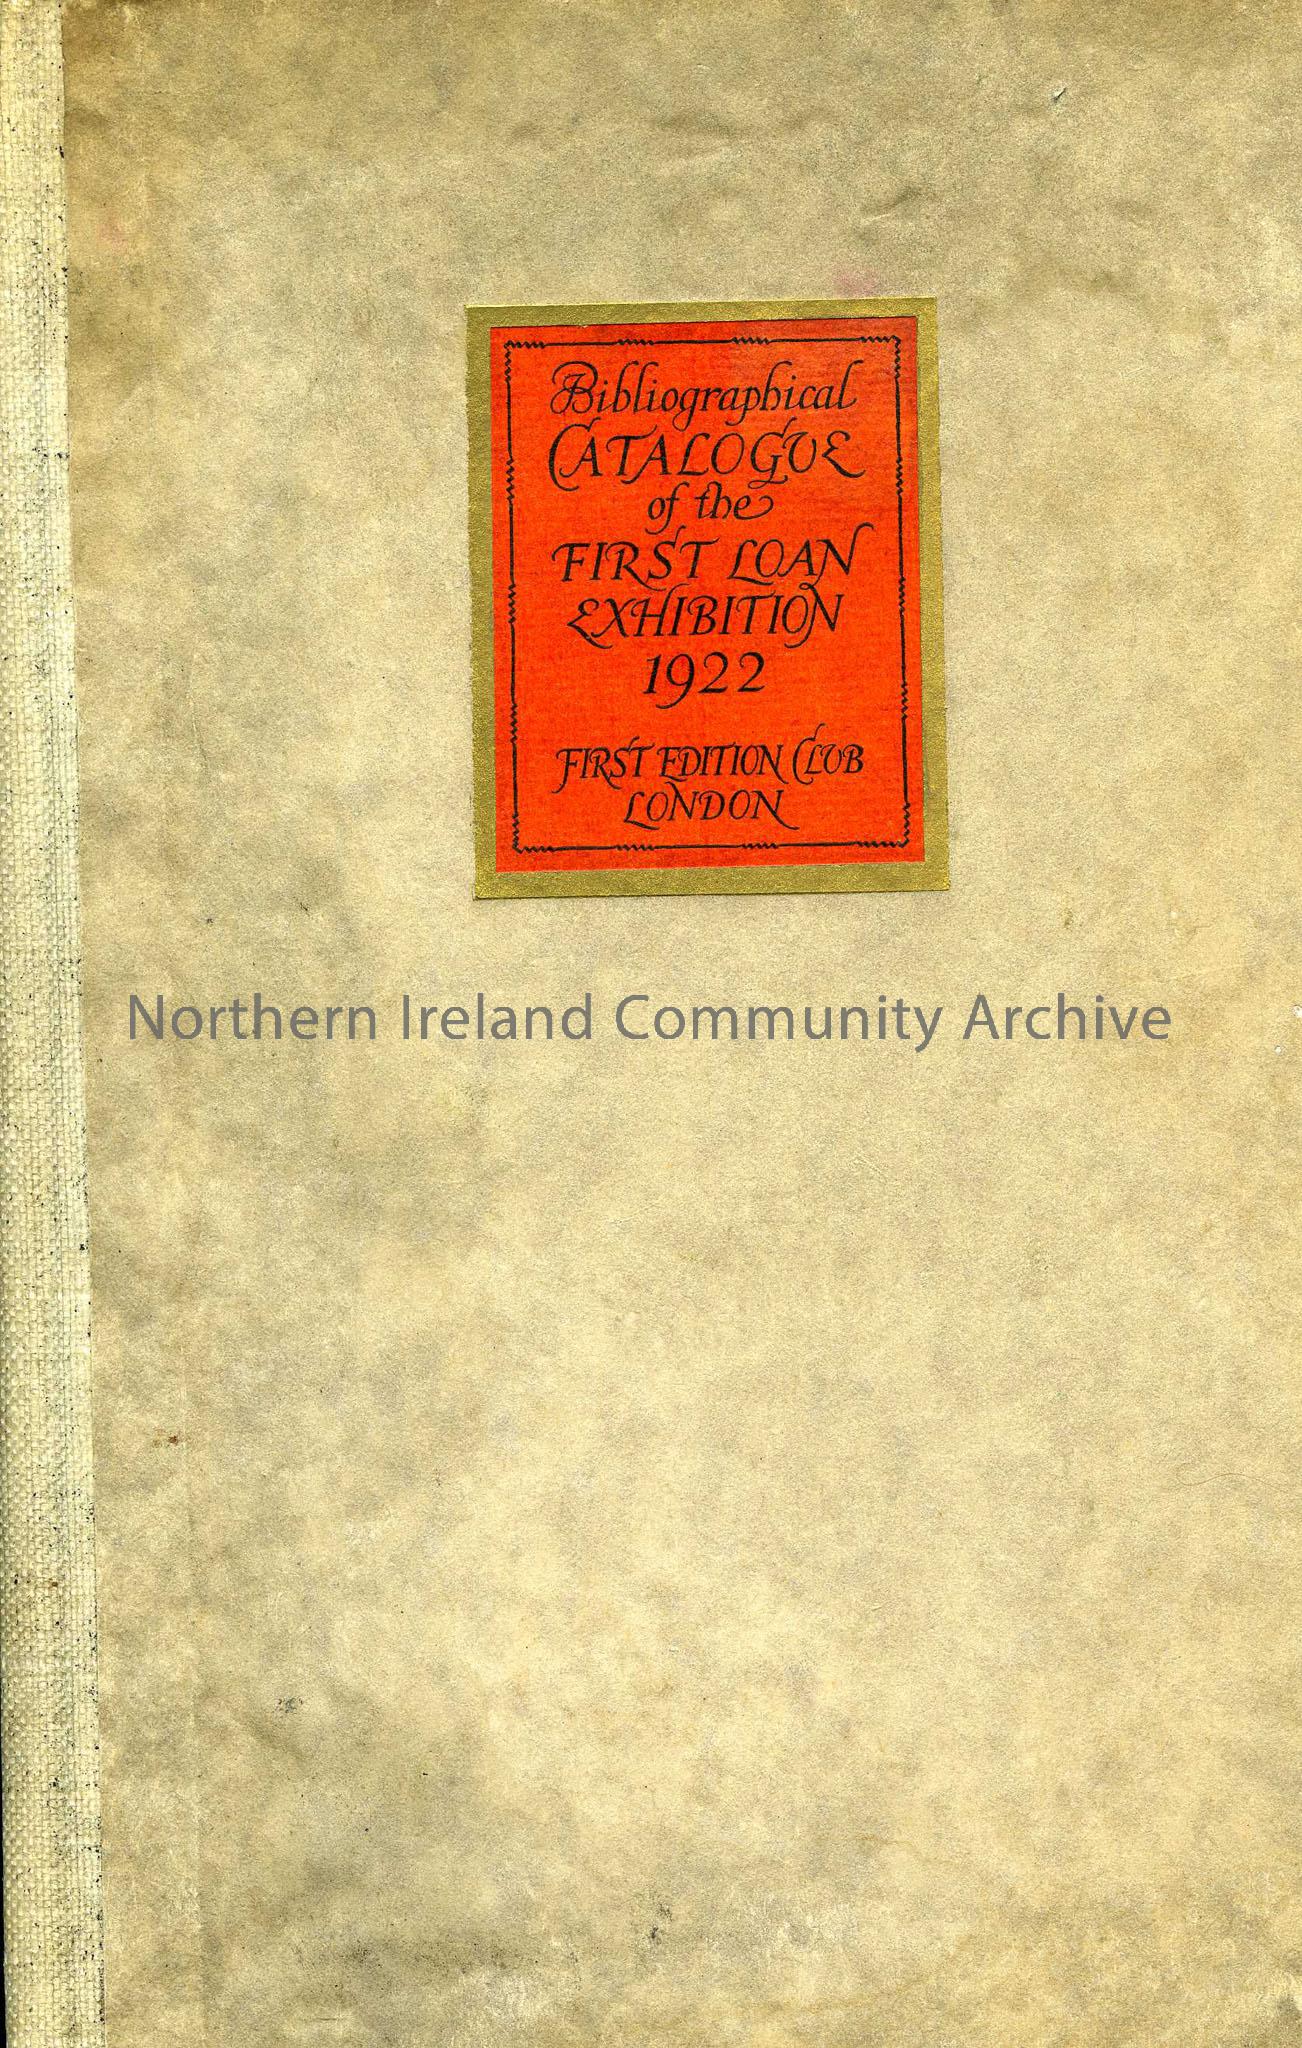 book titled, ‘bibliographical Catalogue of the First Loan Exhibtion 1922’. First Edition Club, London